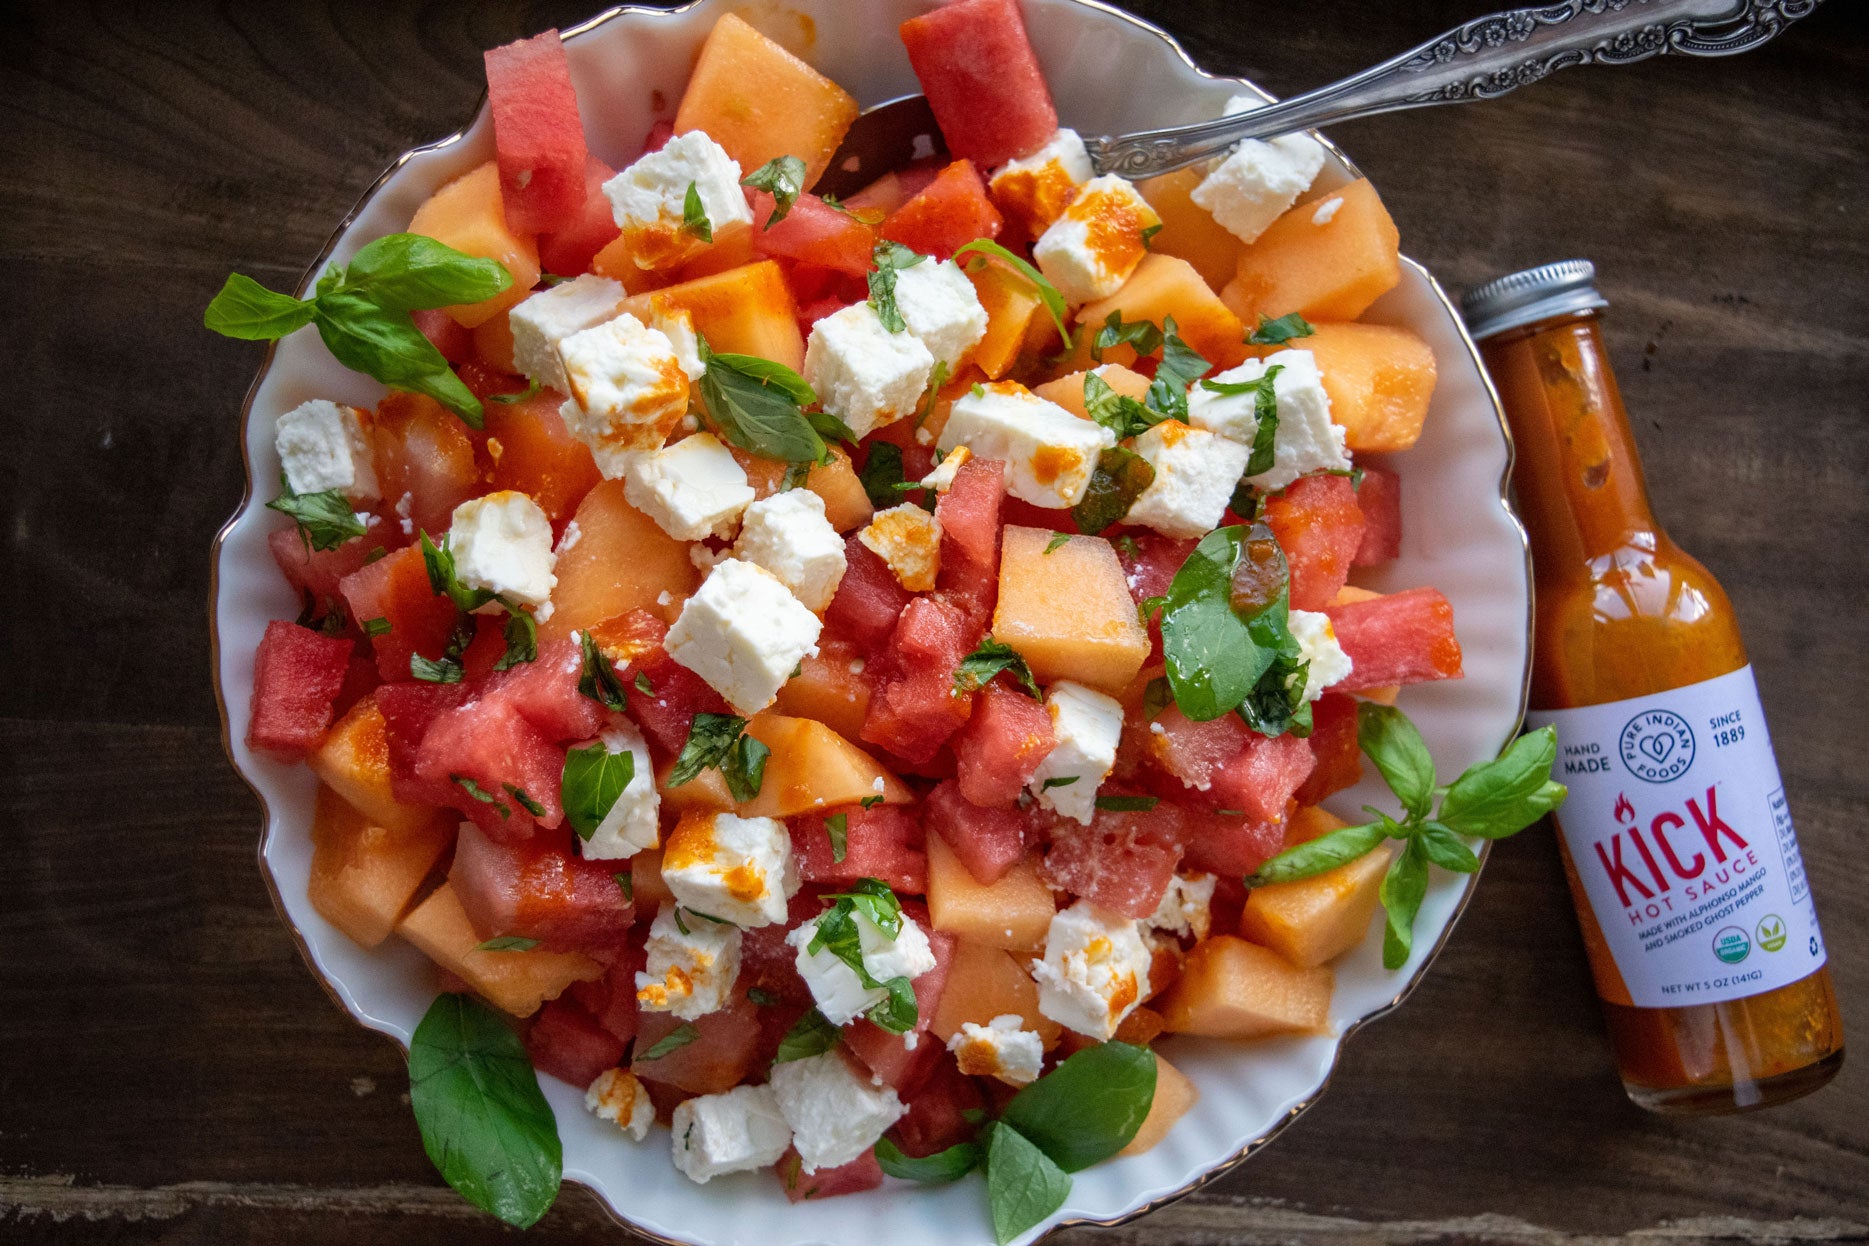 Summer salad of cubed canteloupe, watermelon, cheese, with honey and basil and featuring our Pure Indian Foods KICK Hot Sauce, an organic Mango Ghost pepper hot sauce.